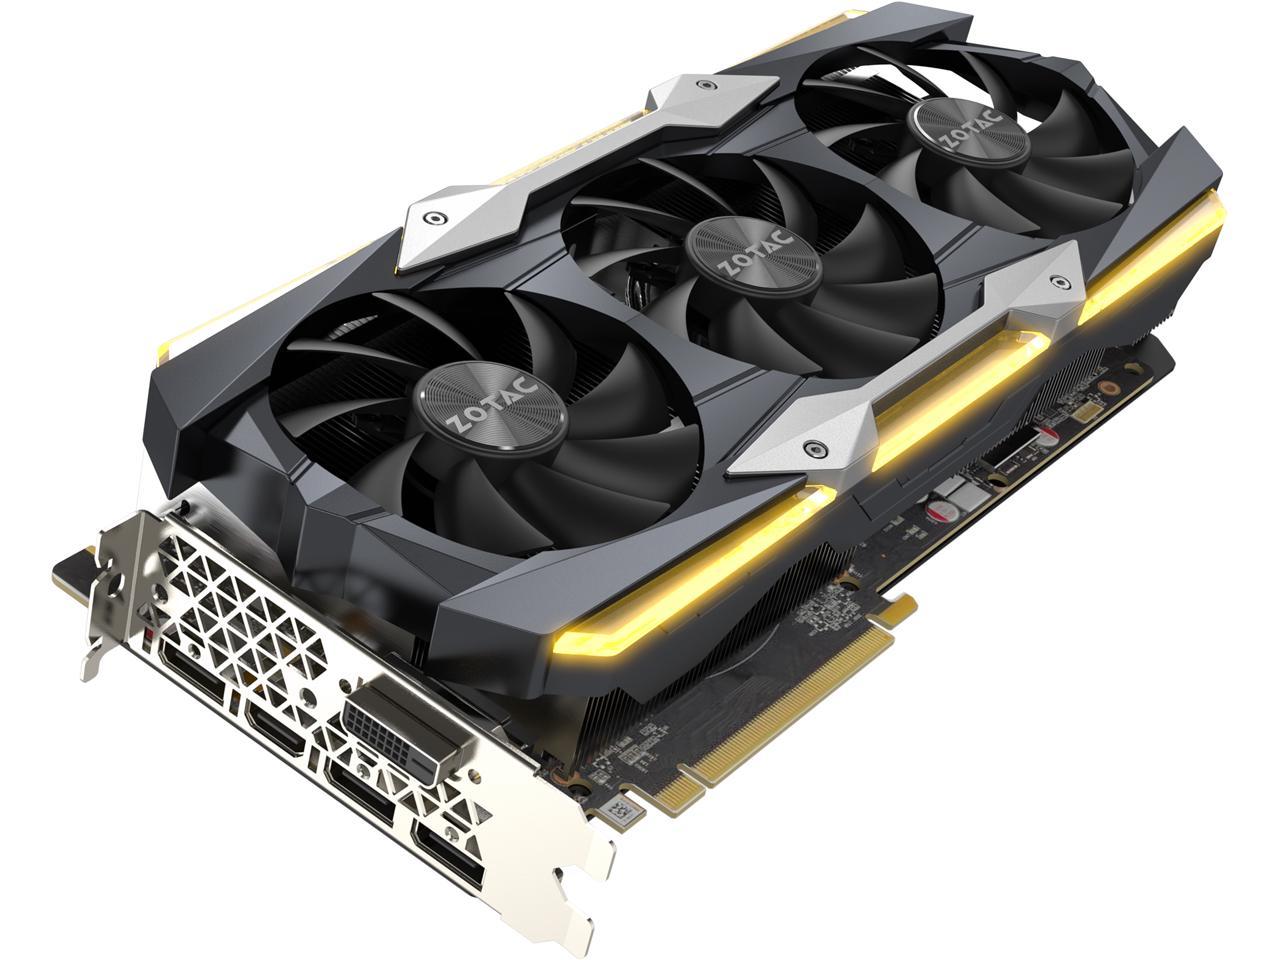 Zotac Geforce Gtx 1080 Ti Amp Extreme 11gb Gddr5x 352 Bit Gaming Graphics Card Vr Ready 16 2 Power Phase Freeze Fan Stop Icestorm Cooling Spectra Lighting Zt Pc 10p Newegg Com